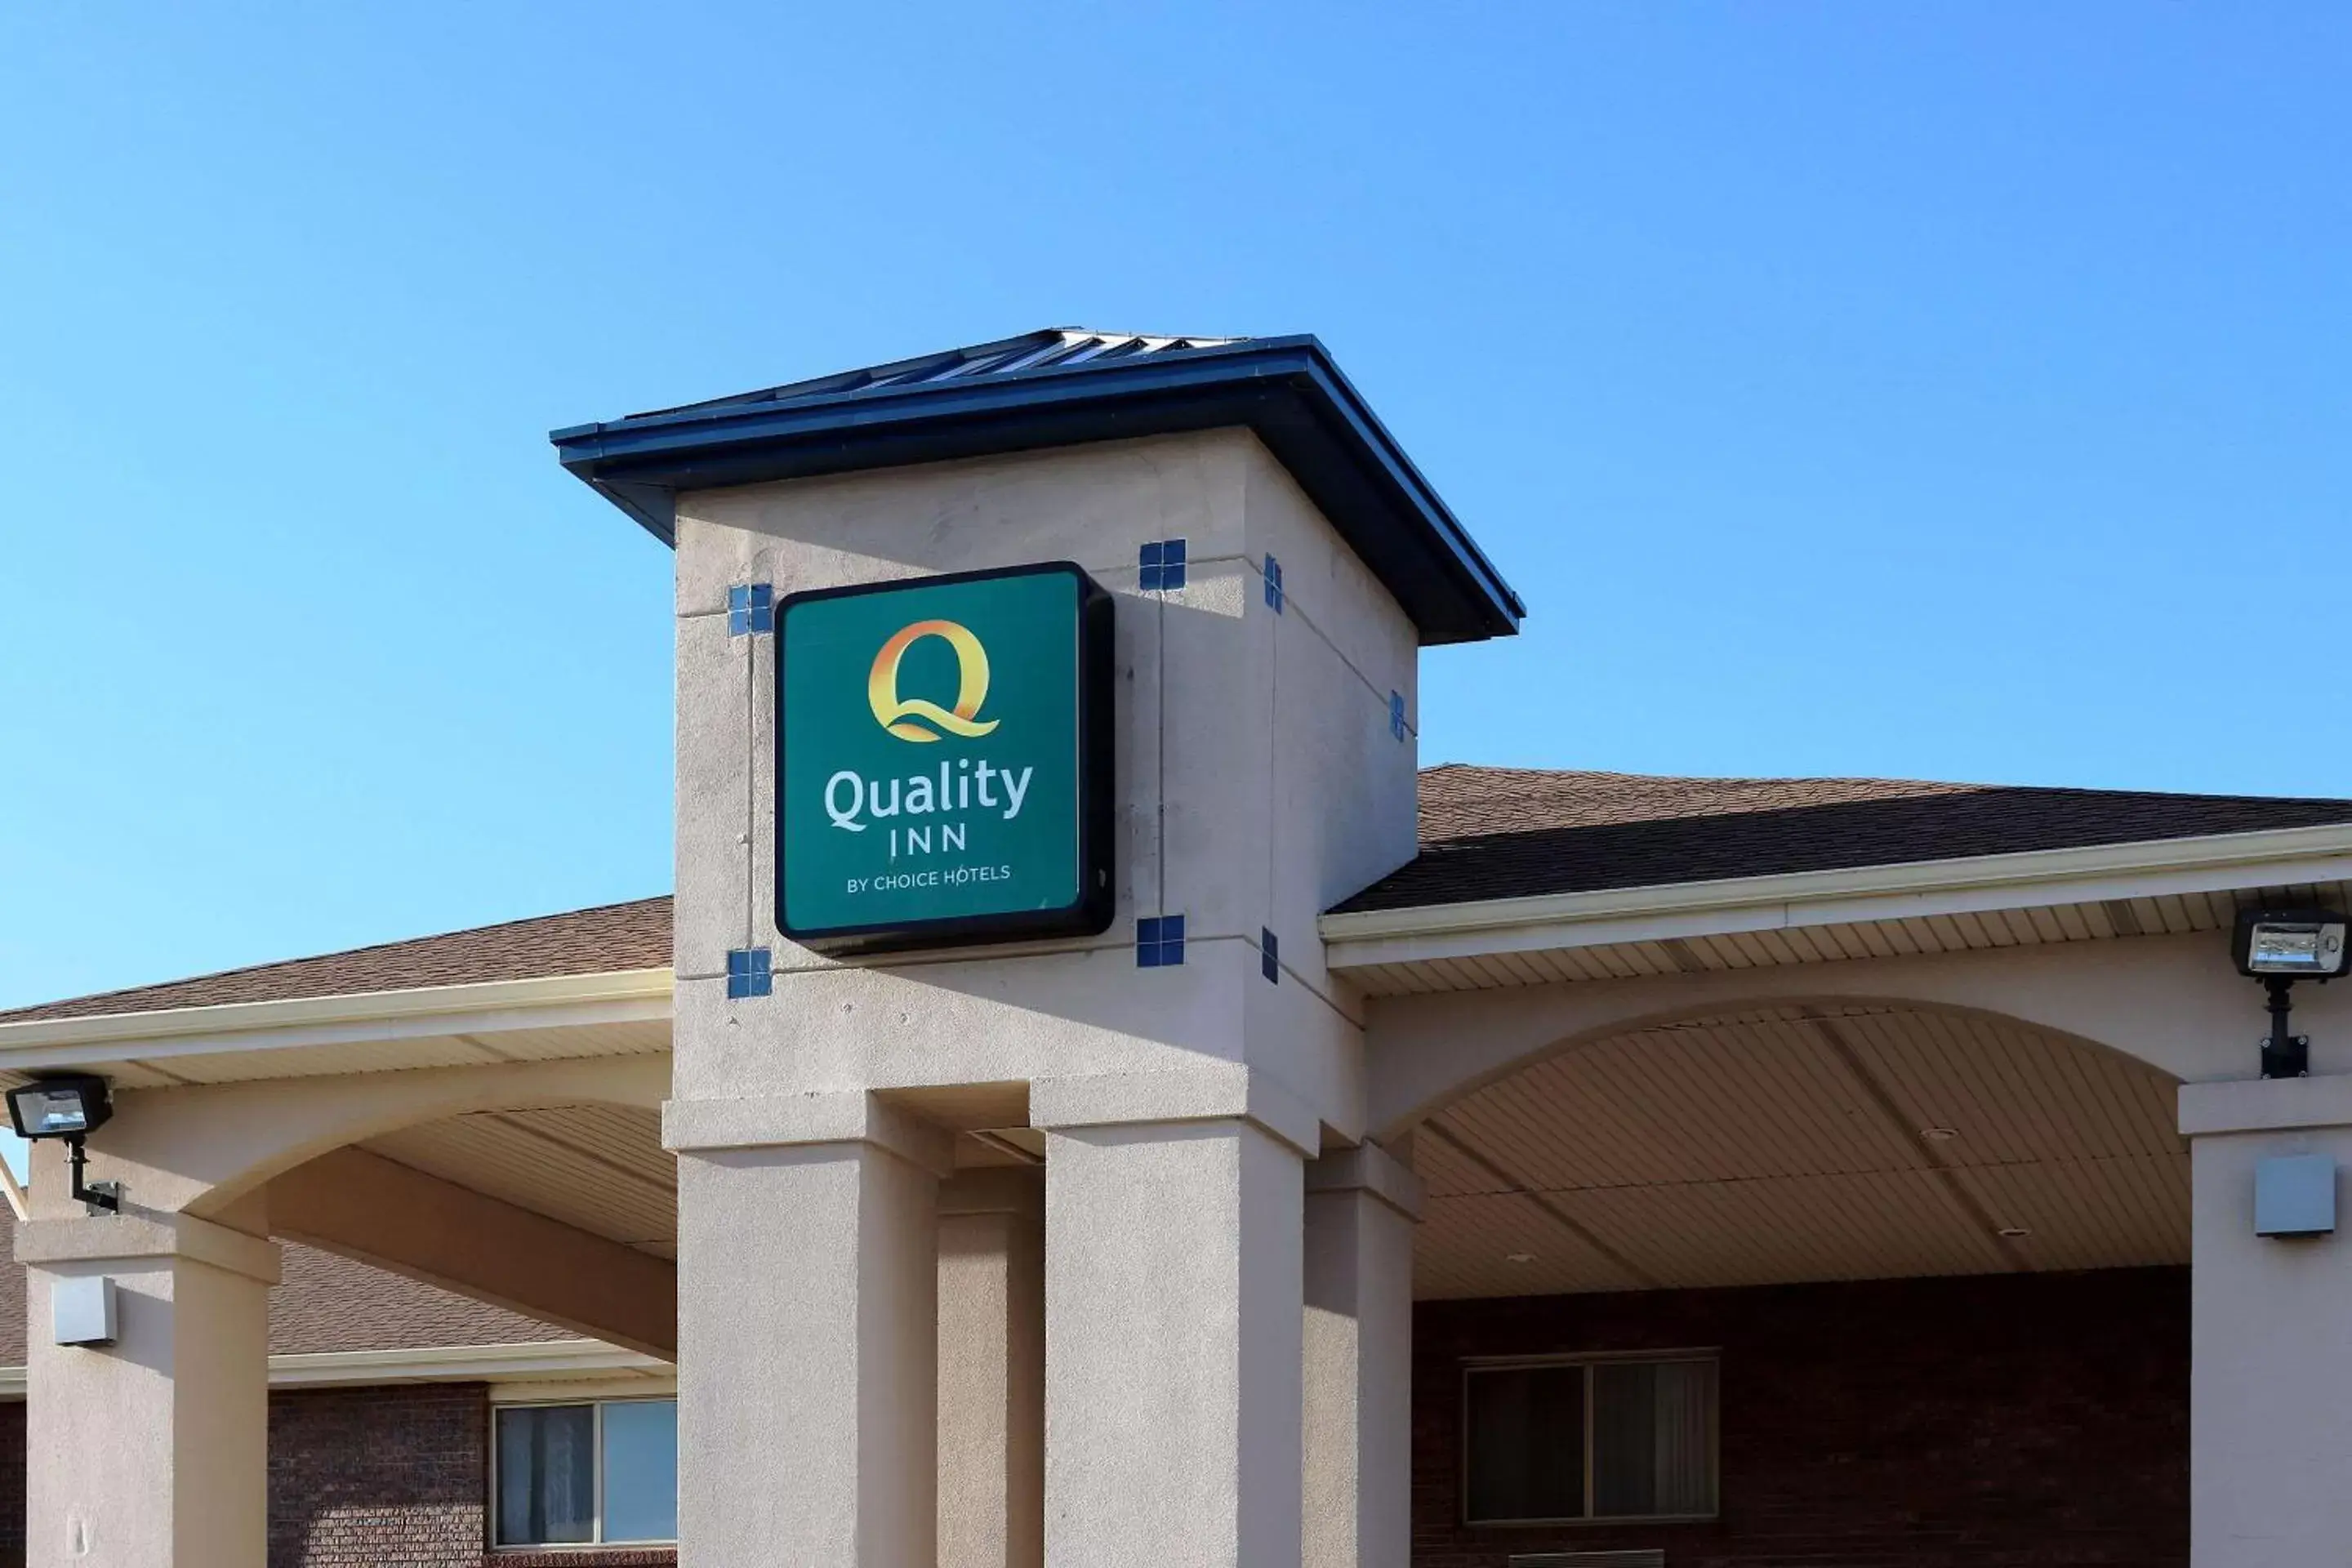 Property building in Quality Inn Lincoln Cornhusker